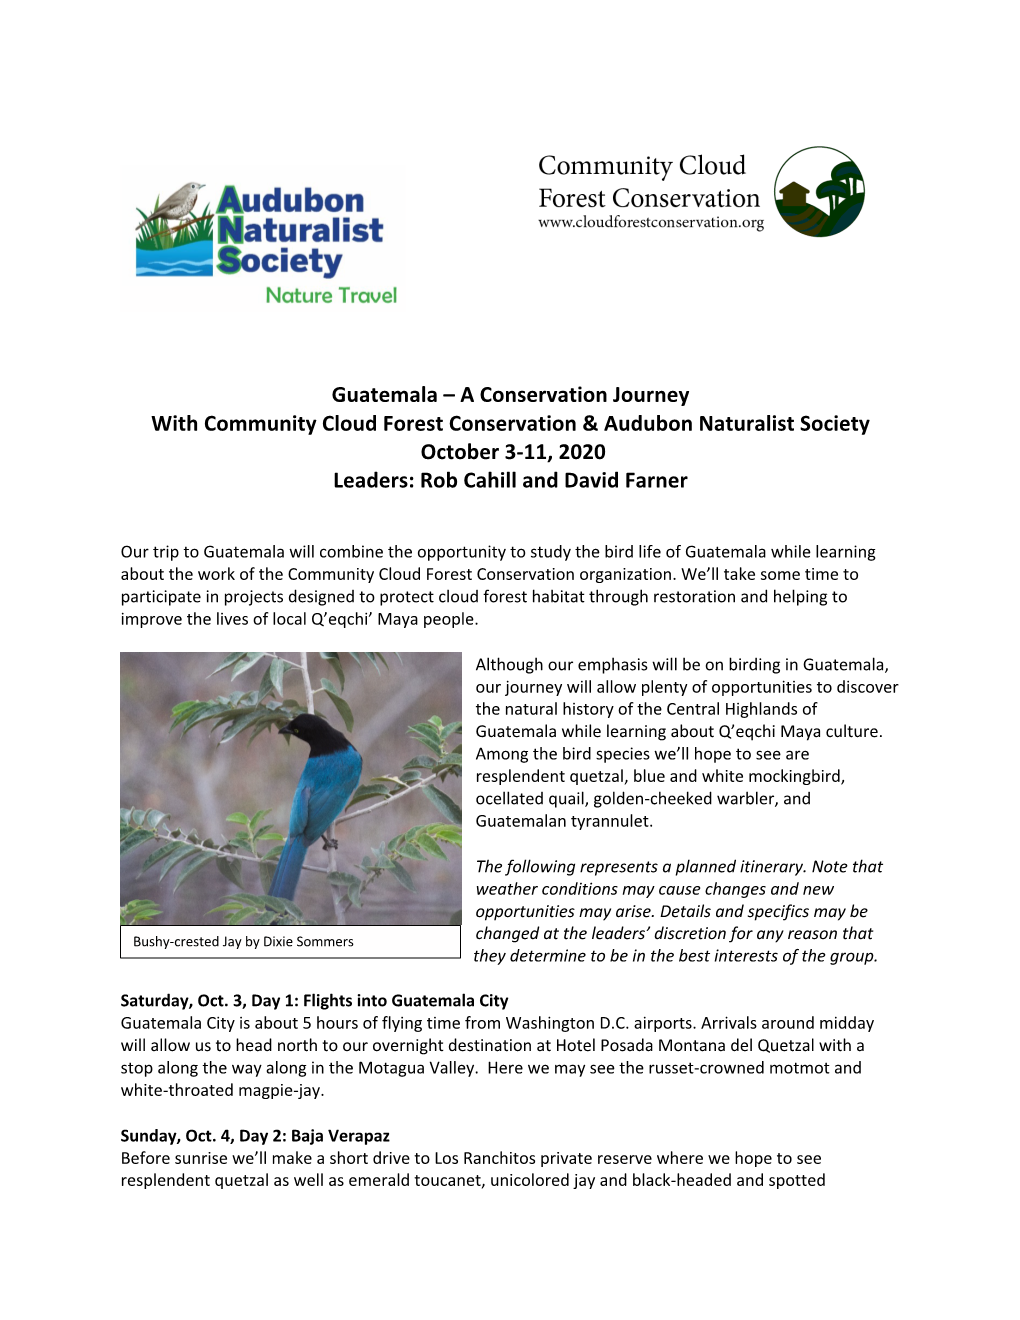 Guatemala – a Conservation Journey with Community Cloud Forest Conservation & Audubon Naturalist Society October 3-11, 2020 Leaders: Rob Cahill and David Farner